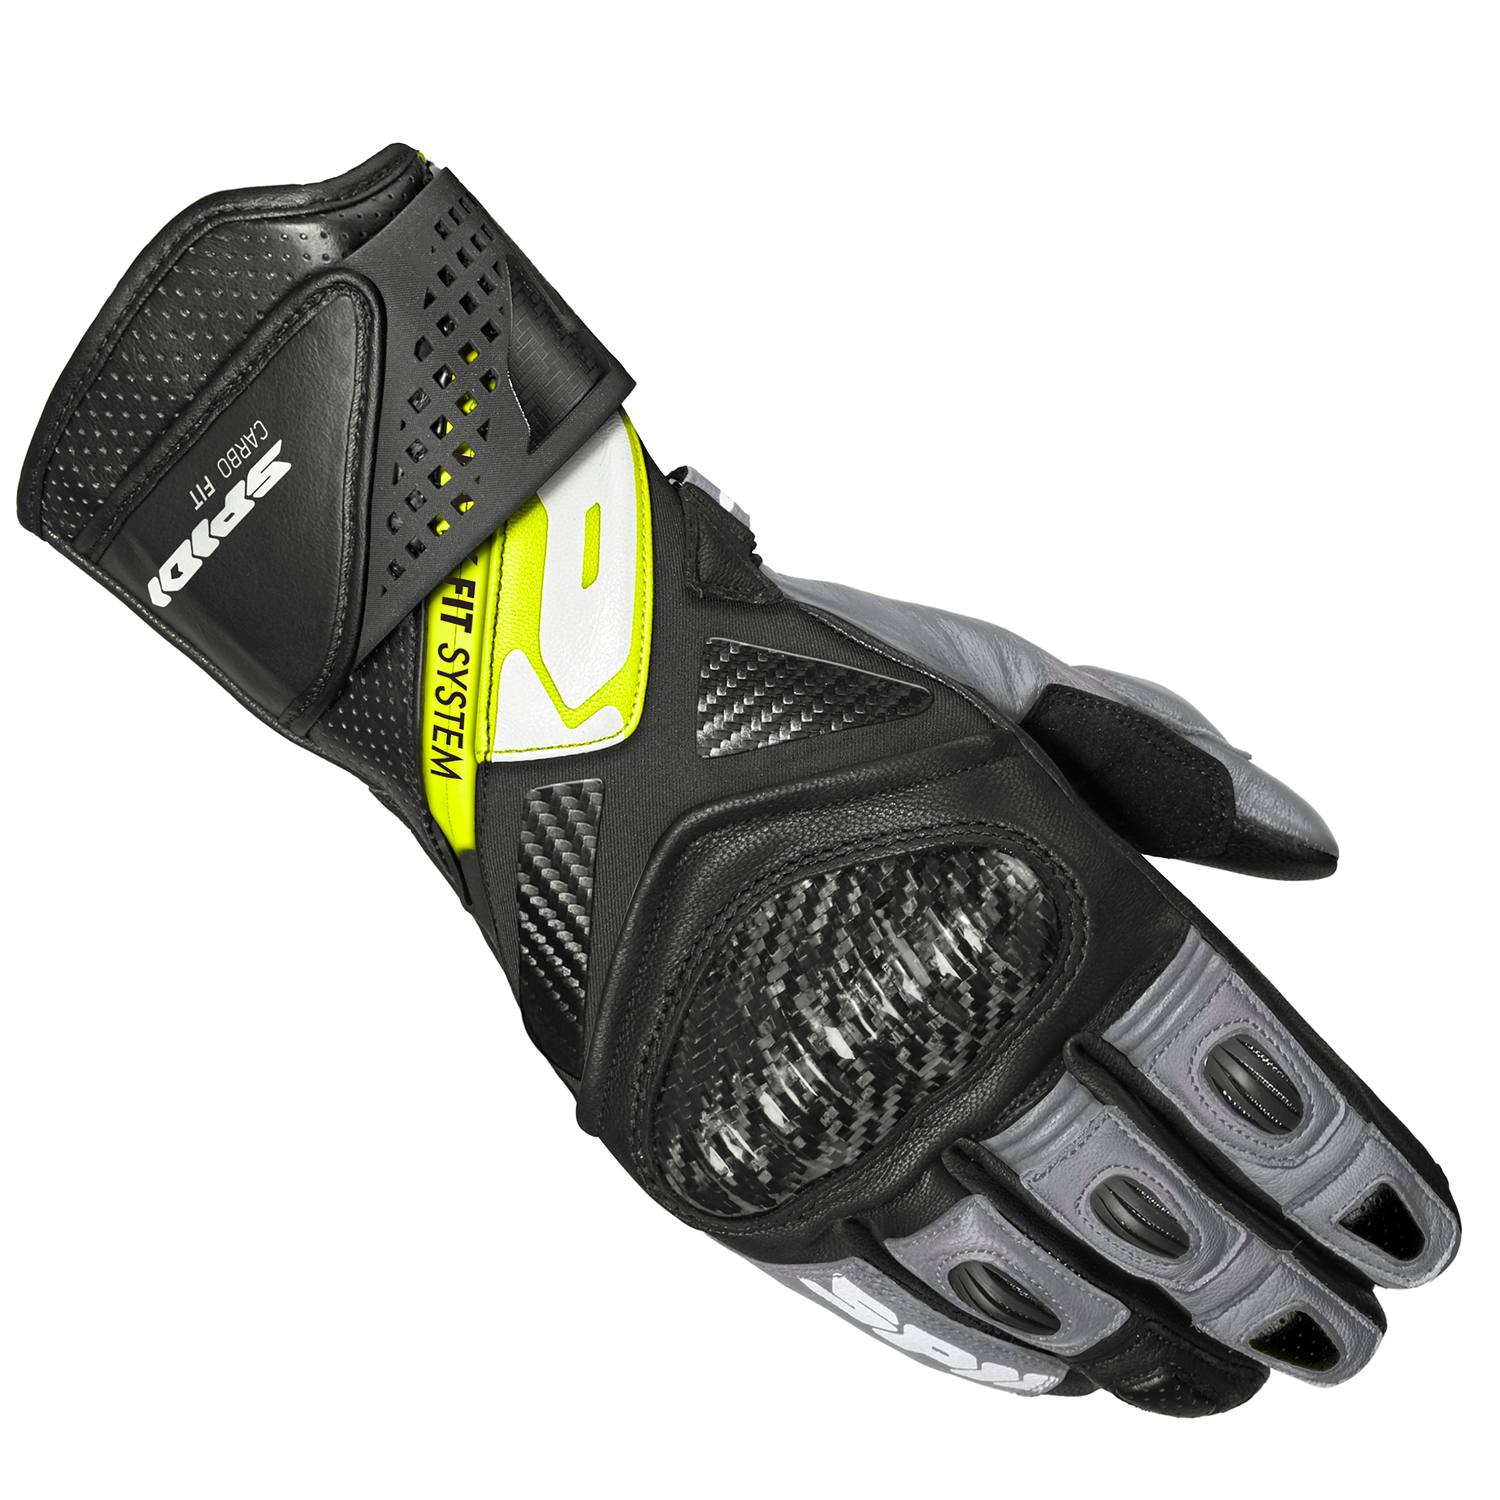 Image of Spidi Carbo Fit Gloves Black Fluorescente Yellow Size S EN